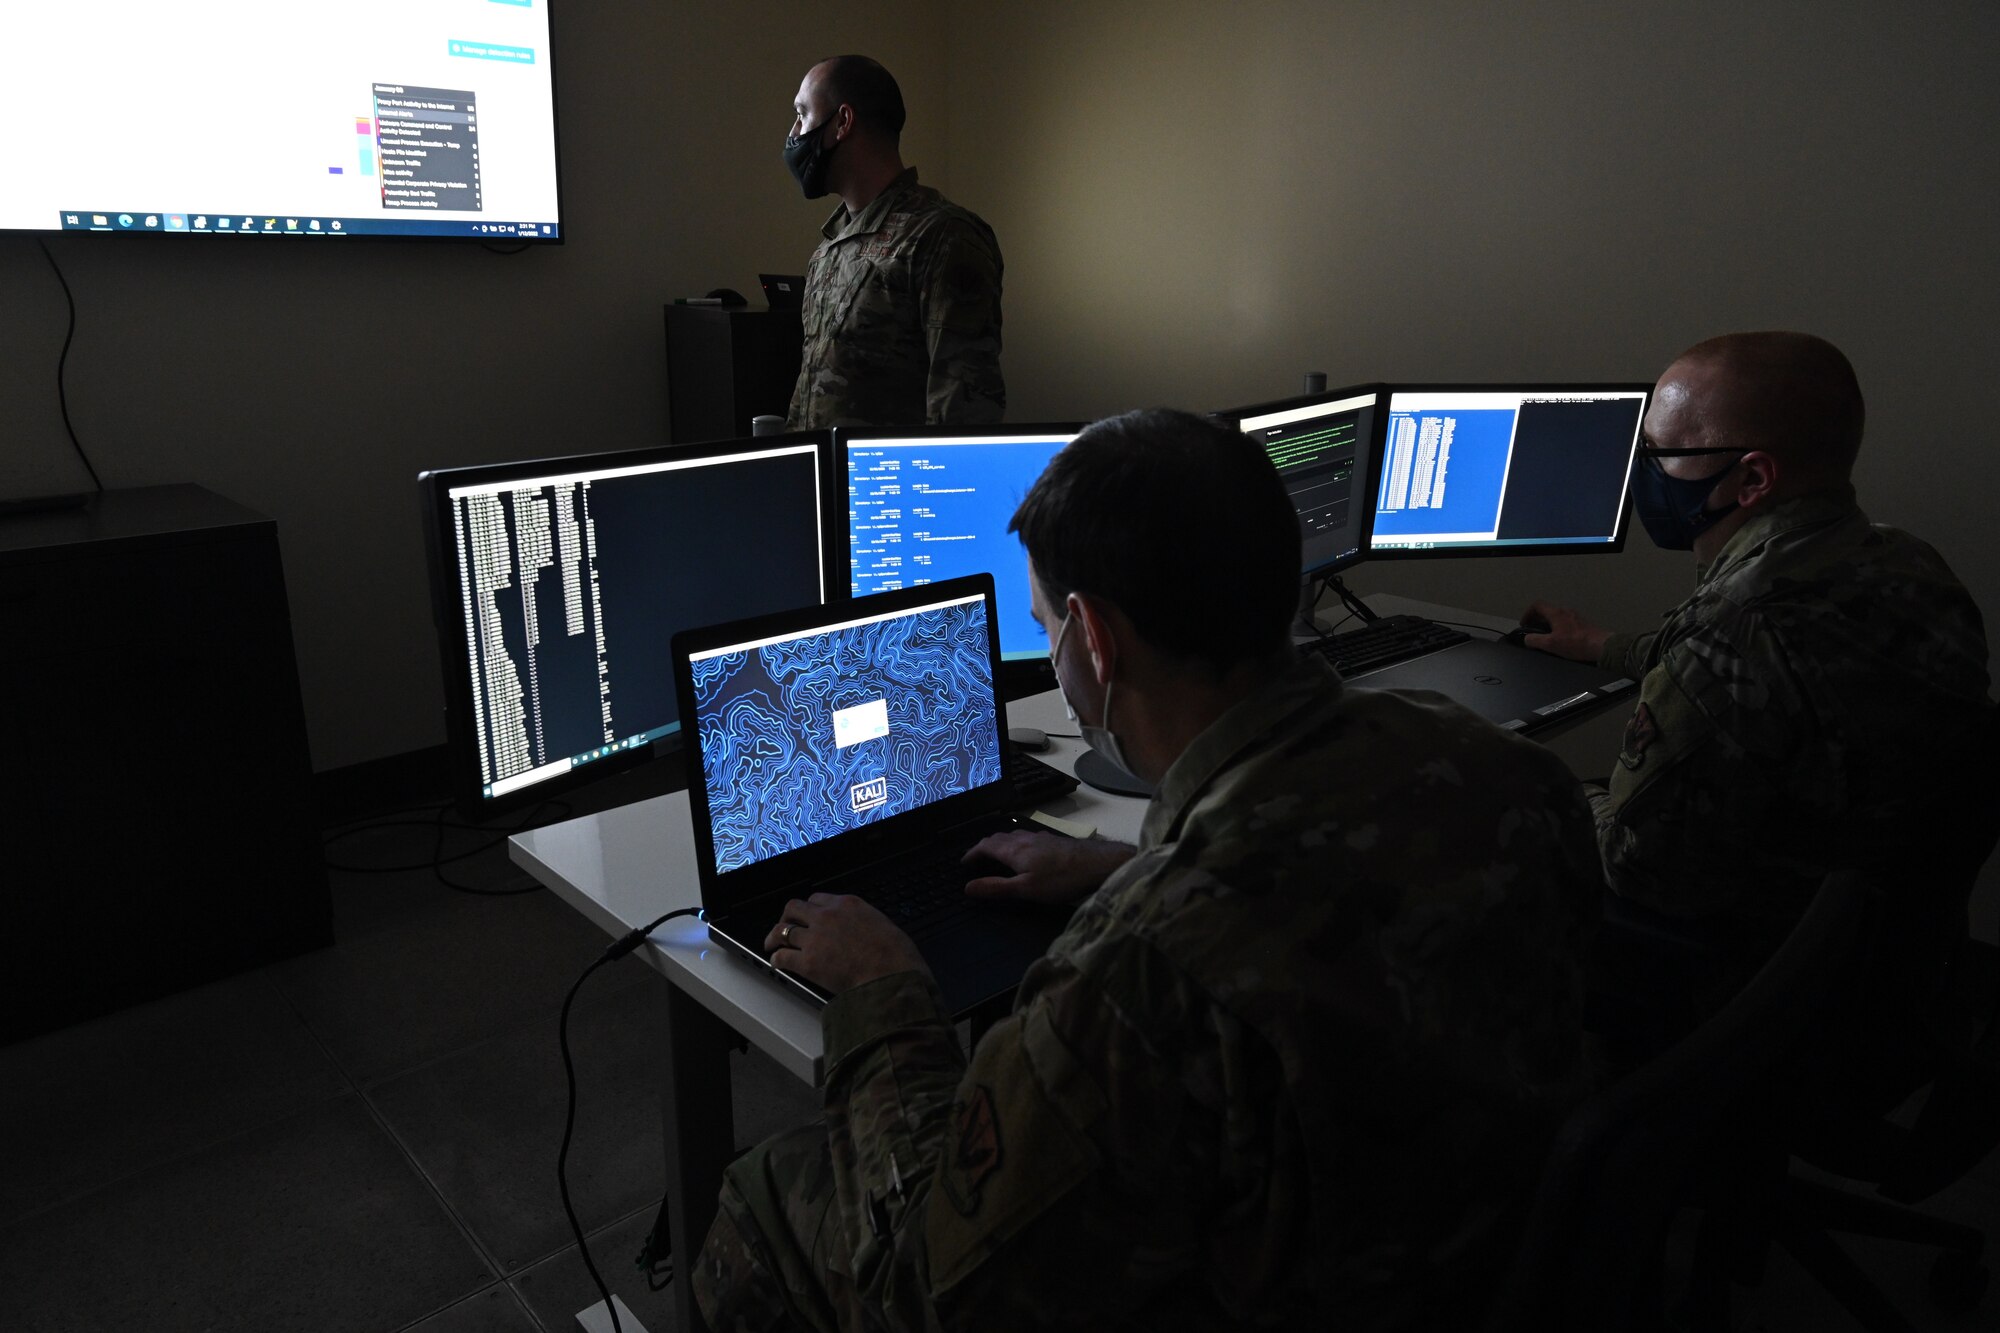 U.S Air Force Capt. John Tibbetts, Network Analyst Lead for the 275th Cyber Operations Group, U.S Air Force Tech. Sgt. Justin Rodgers, Host Analyst Lead for the 275th COS, and U.S Air Force Master Sgt. Zachary Lidie, Network Analyst for the 275th COS, go over a defensive training conducted in November, in the Cyber operations building at the 175 Wing, Warfield Air National Guard Base, Middle River, Md, Jan. 12, 2022.  The mission entailed airmen in a T-32 status conducting unscripted training on the base NIPR network. (U.S. Air National Guard photo by A1C Alexandra Huettner)